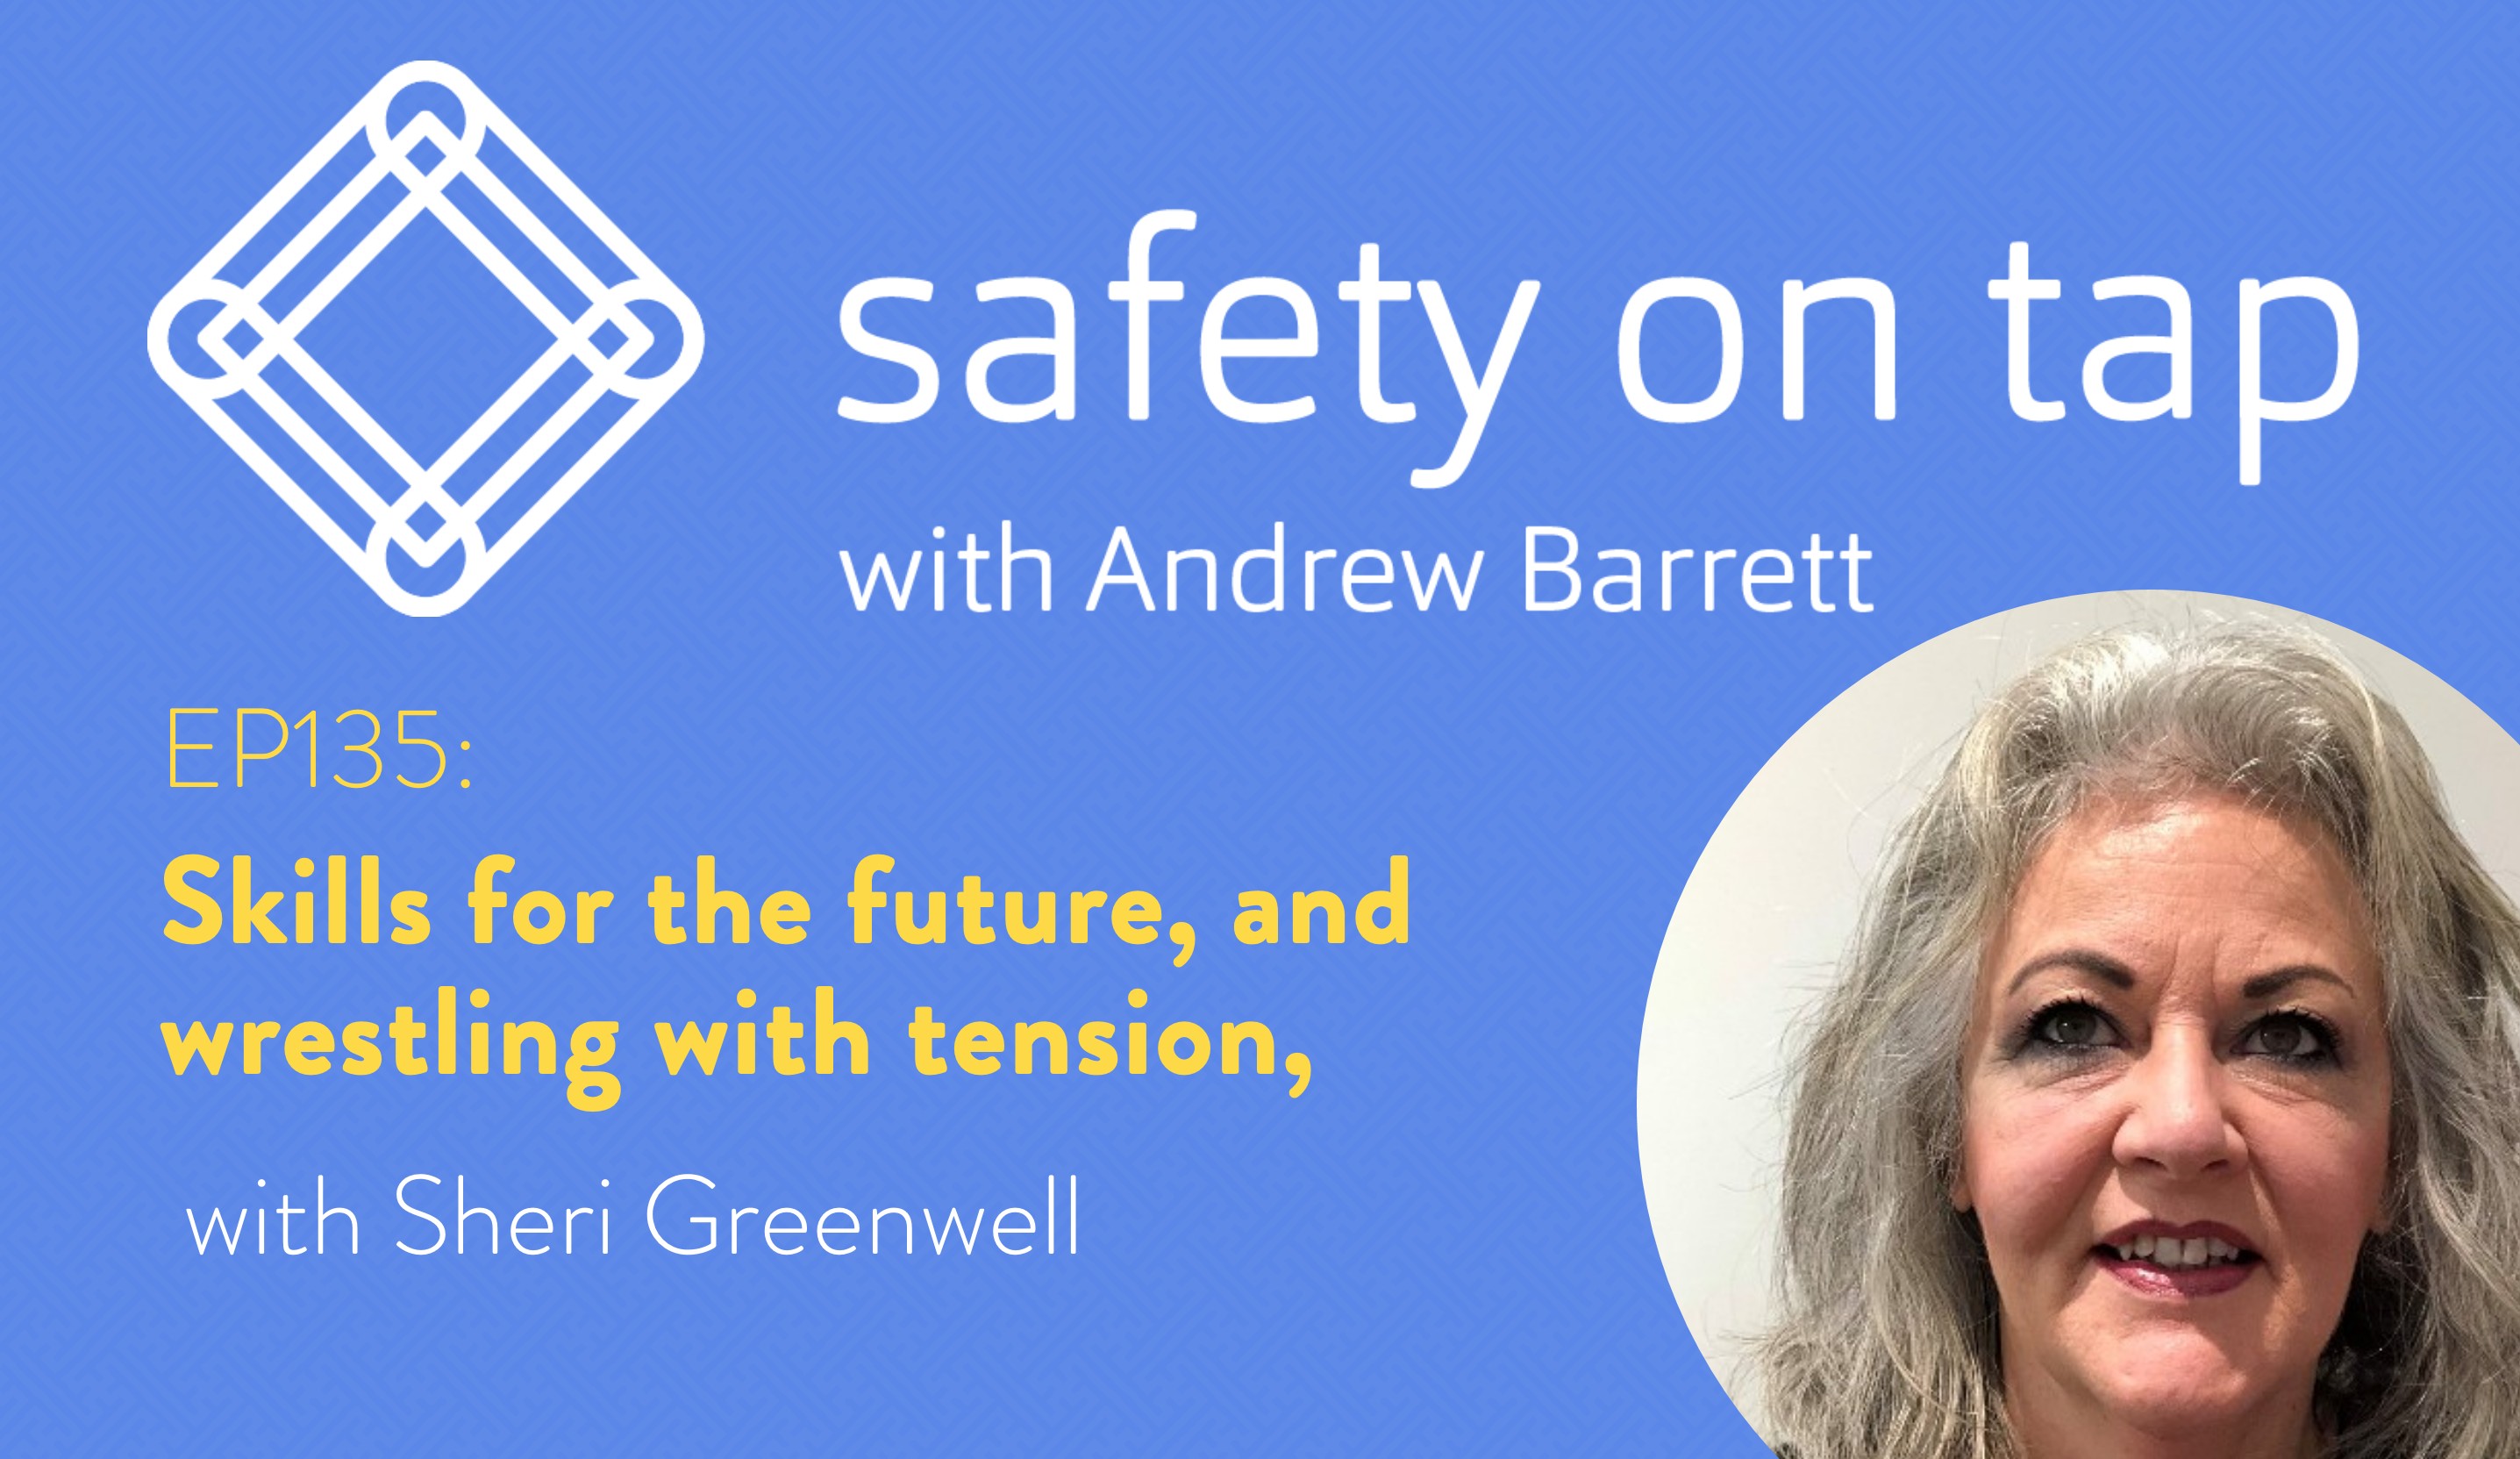 Ep135: Skills for the future, and wrestling with tension, with Sheri Greenwell